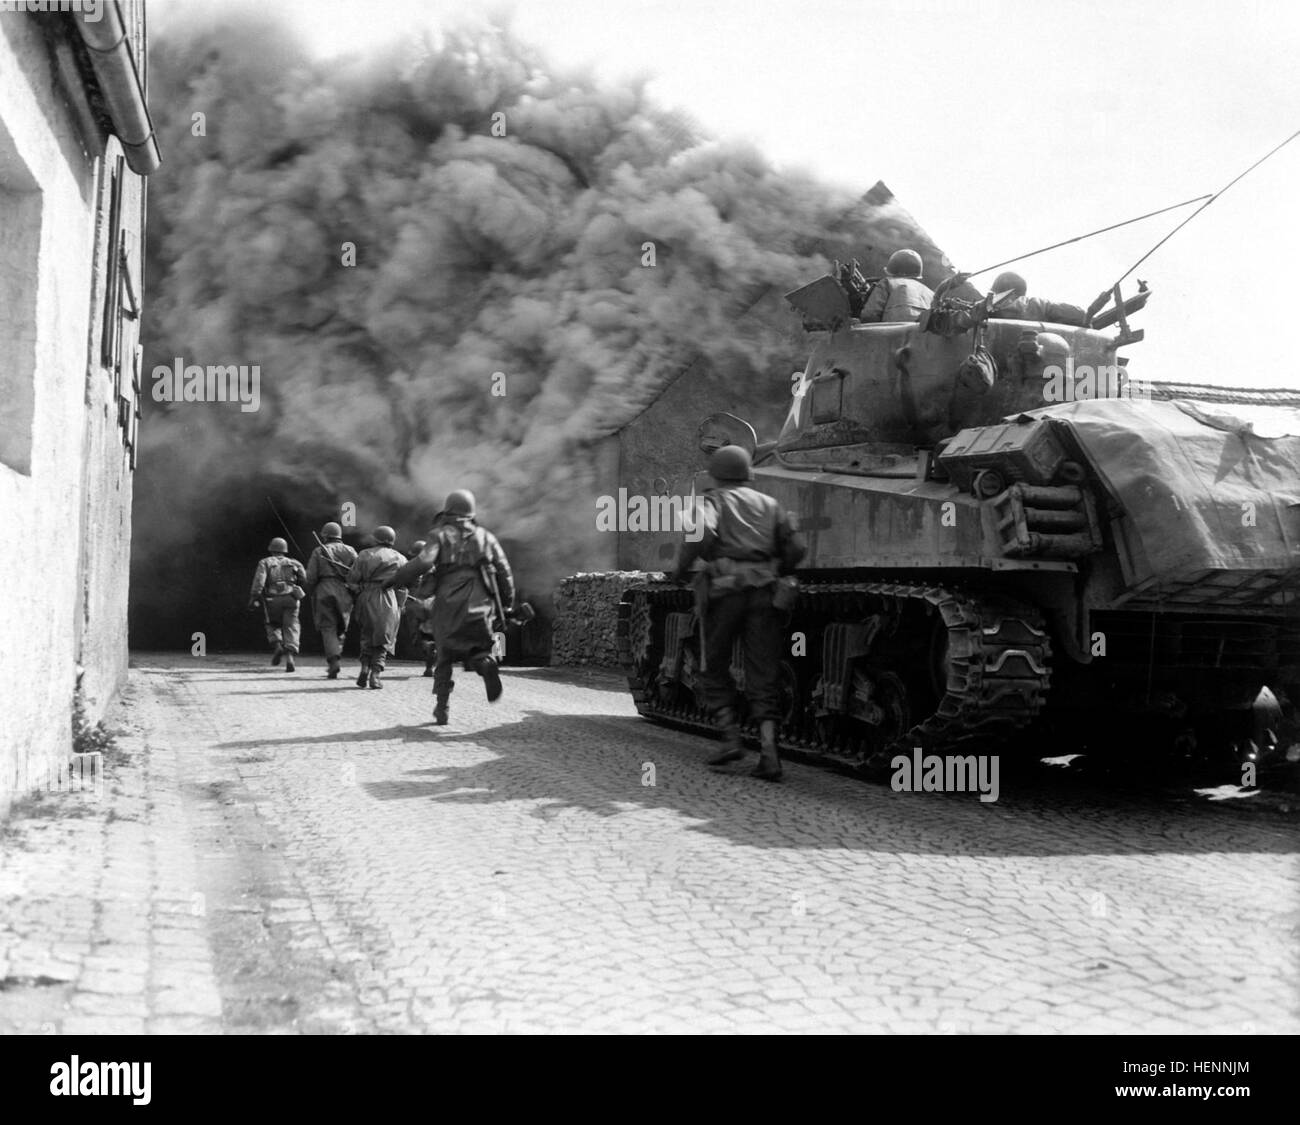 Soldiers of the 55th Armored Infantry Battalion and tank of the 22nd Tank Battalion, move through smoke filled street.  Wernberg, Germany.  April 22, 1945.  Pvt. Joseph Scrippens.  (Army) NARA FILE #:  111-SC-205298 WAR & CONFLICT BOOK #:  1094 Wernberg1945 Stock Photo